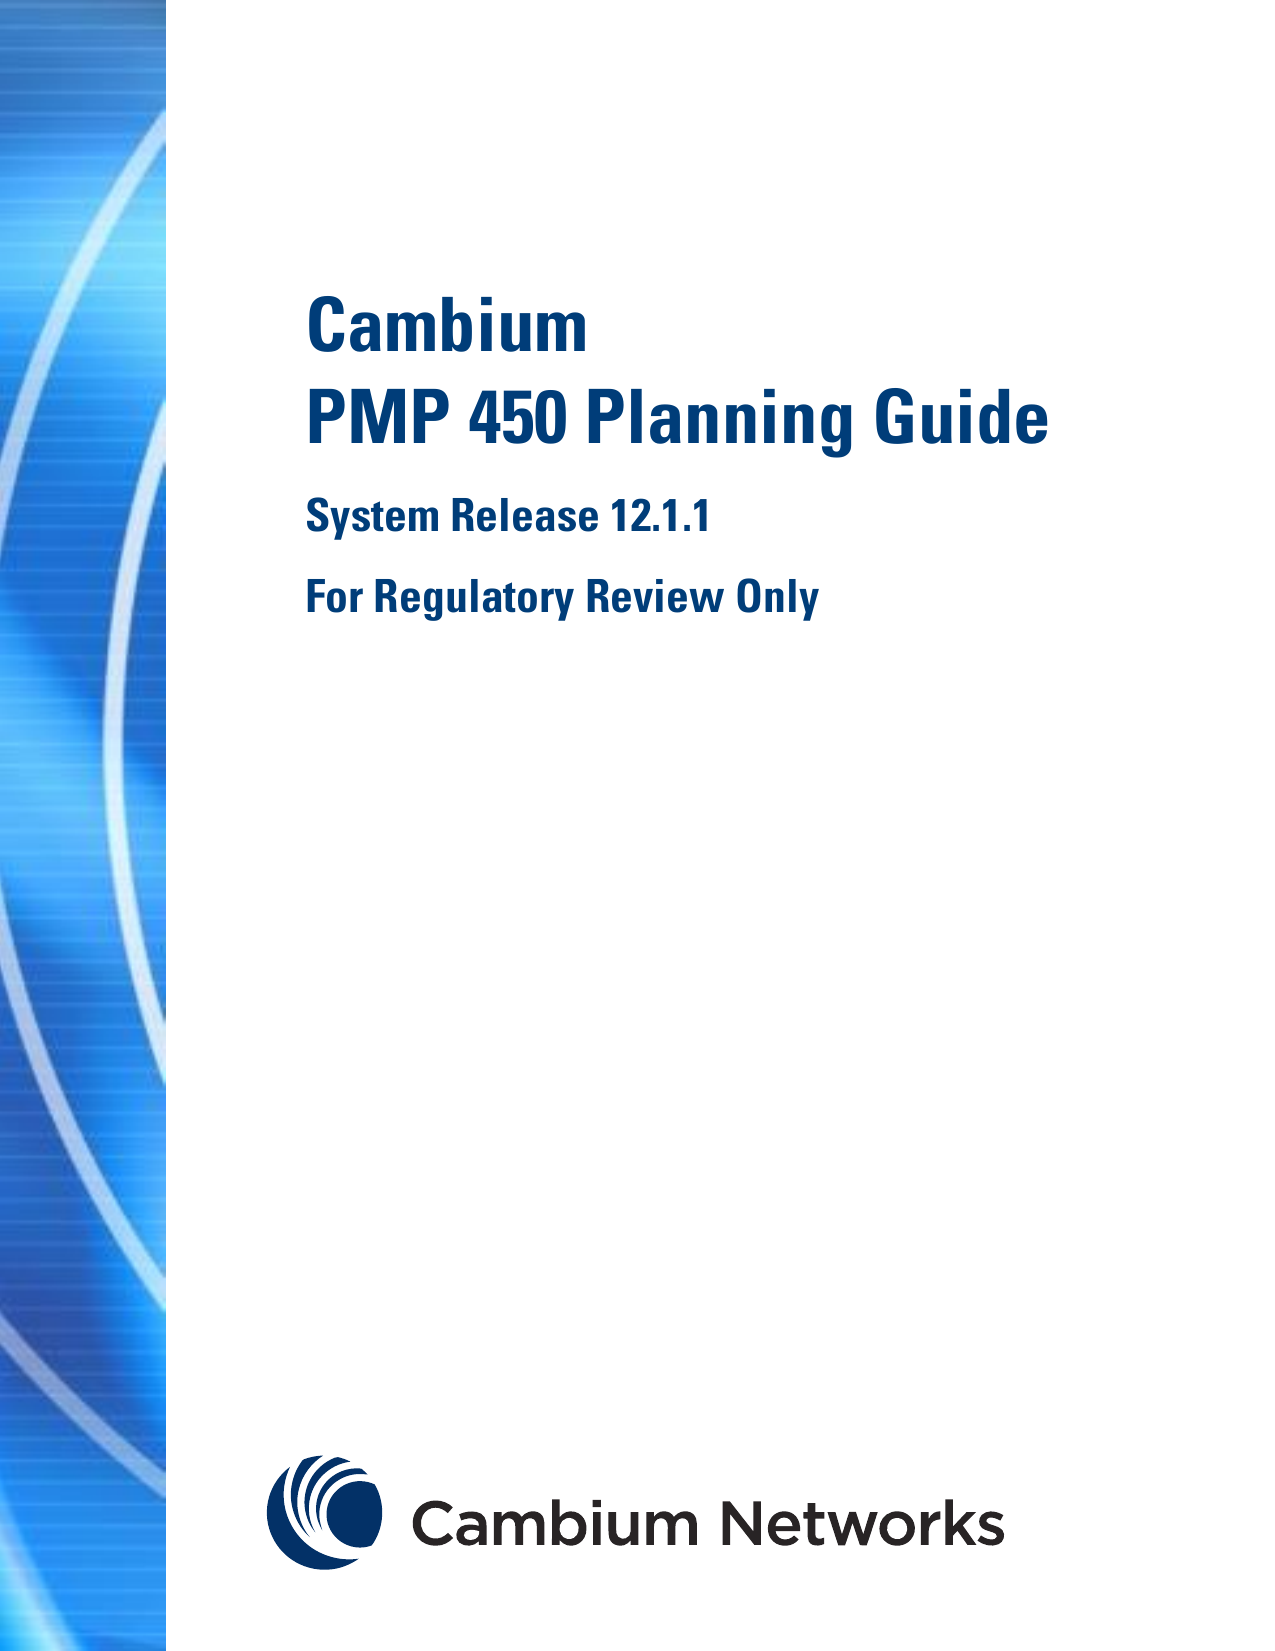       Cambium PMP 450 Planning Guide System Release 12.1.1 For Regulatory Review Only     